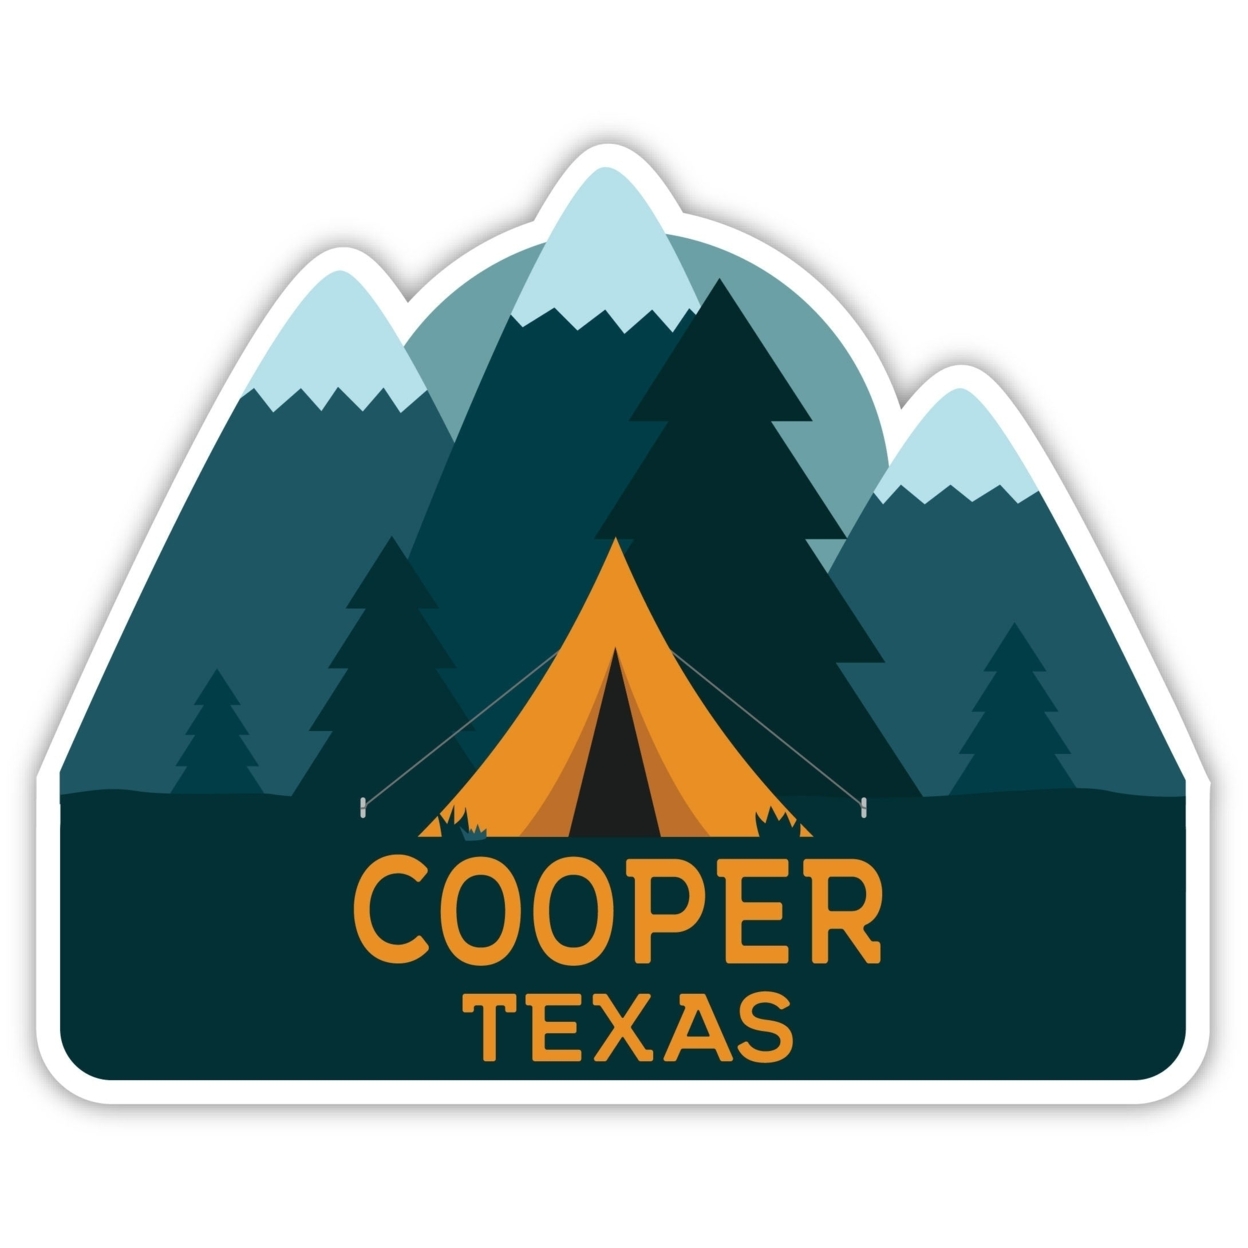 Cooper Texas Souvenir Decorative Stickers (Choose Theme And Size) - 4-Pack, 6-Inch, Tent